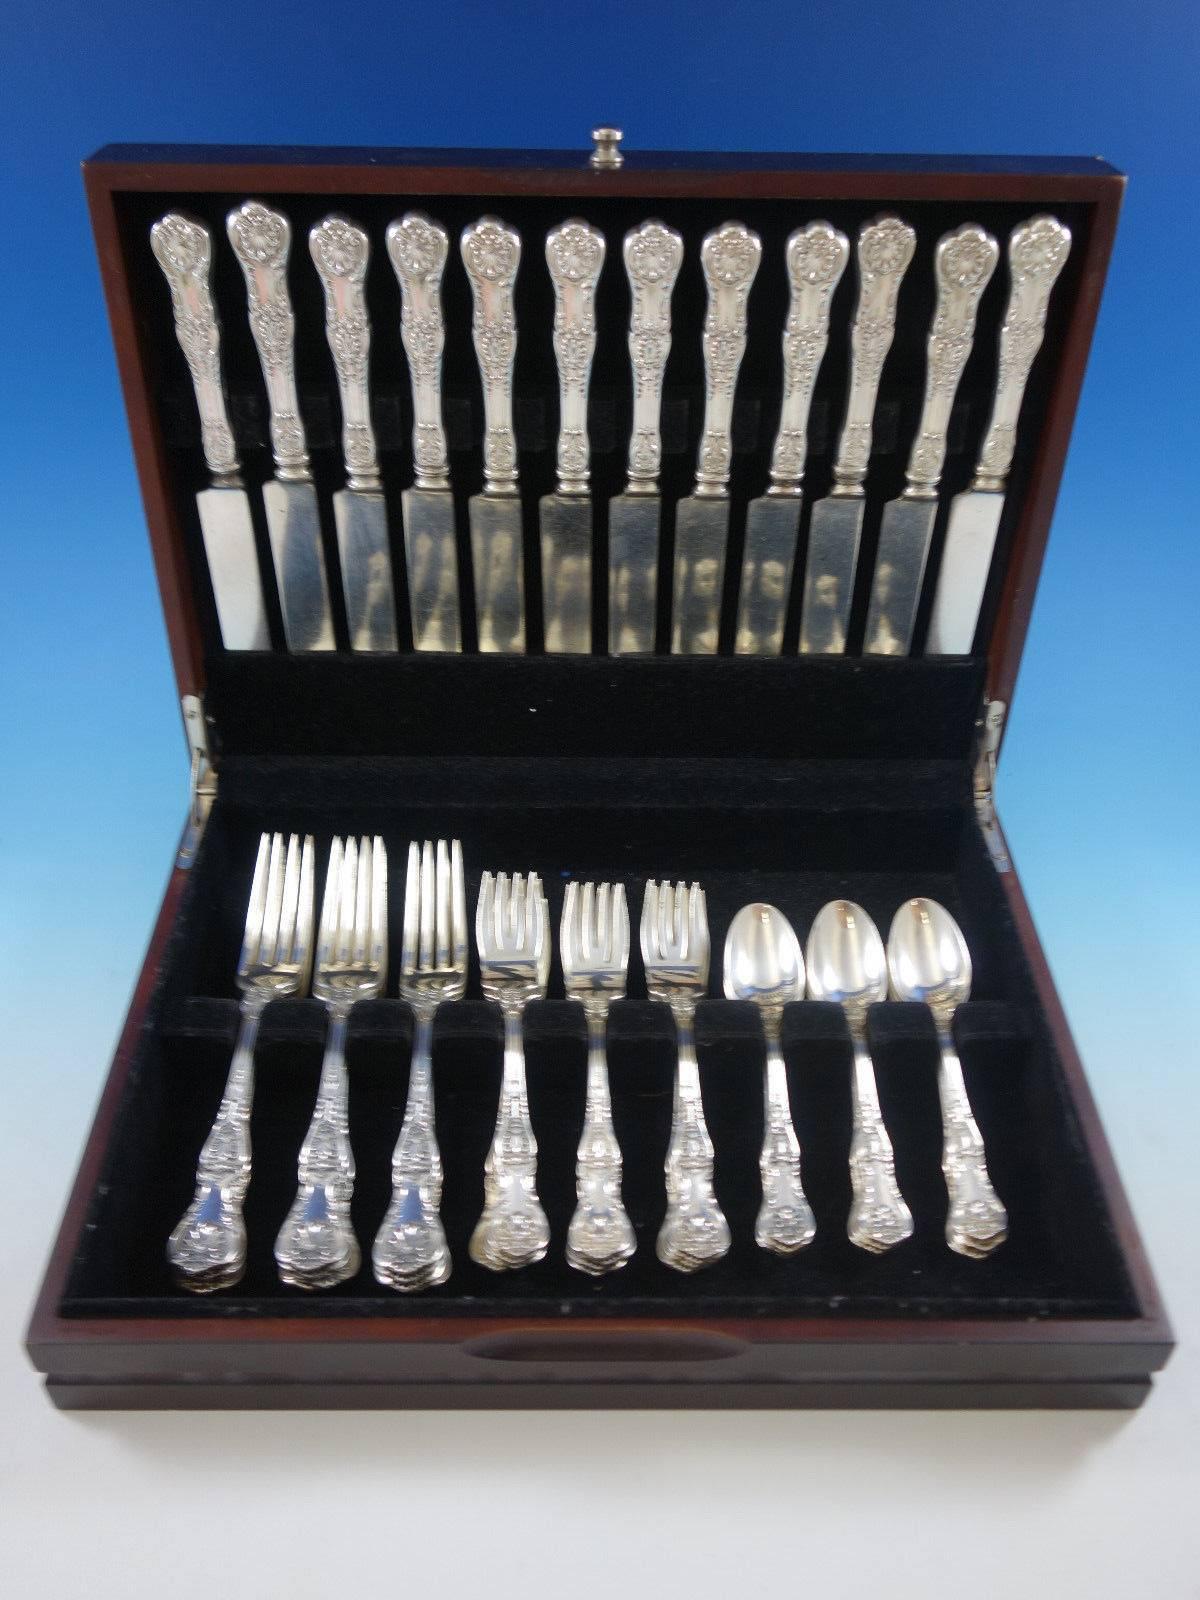 King George by Gorham shell motif sterling silver flatware set, 48 pieces. This set includes: 

12 dinner size knives, 9 3/4